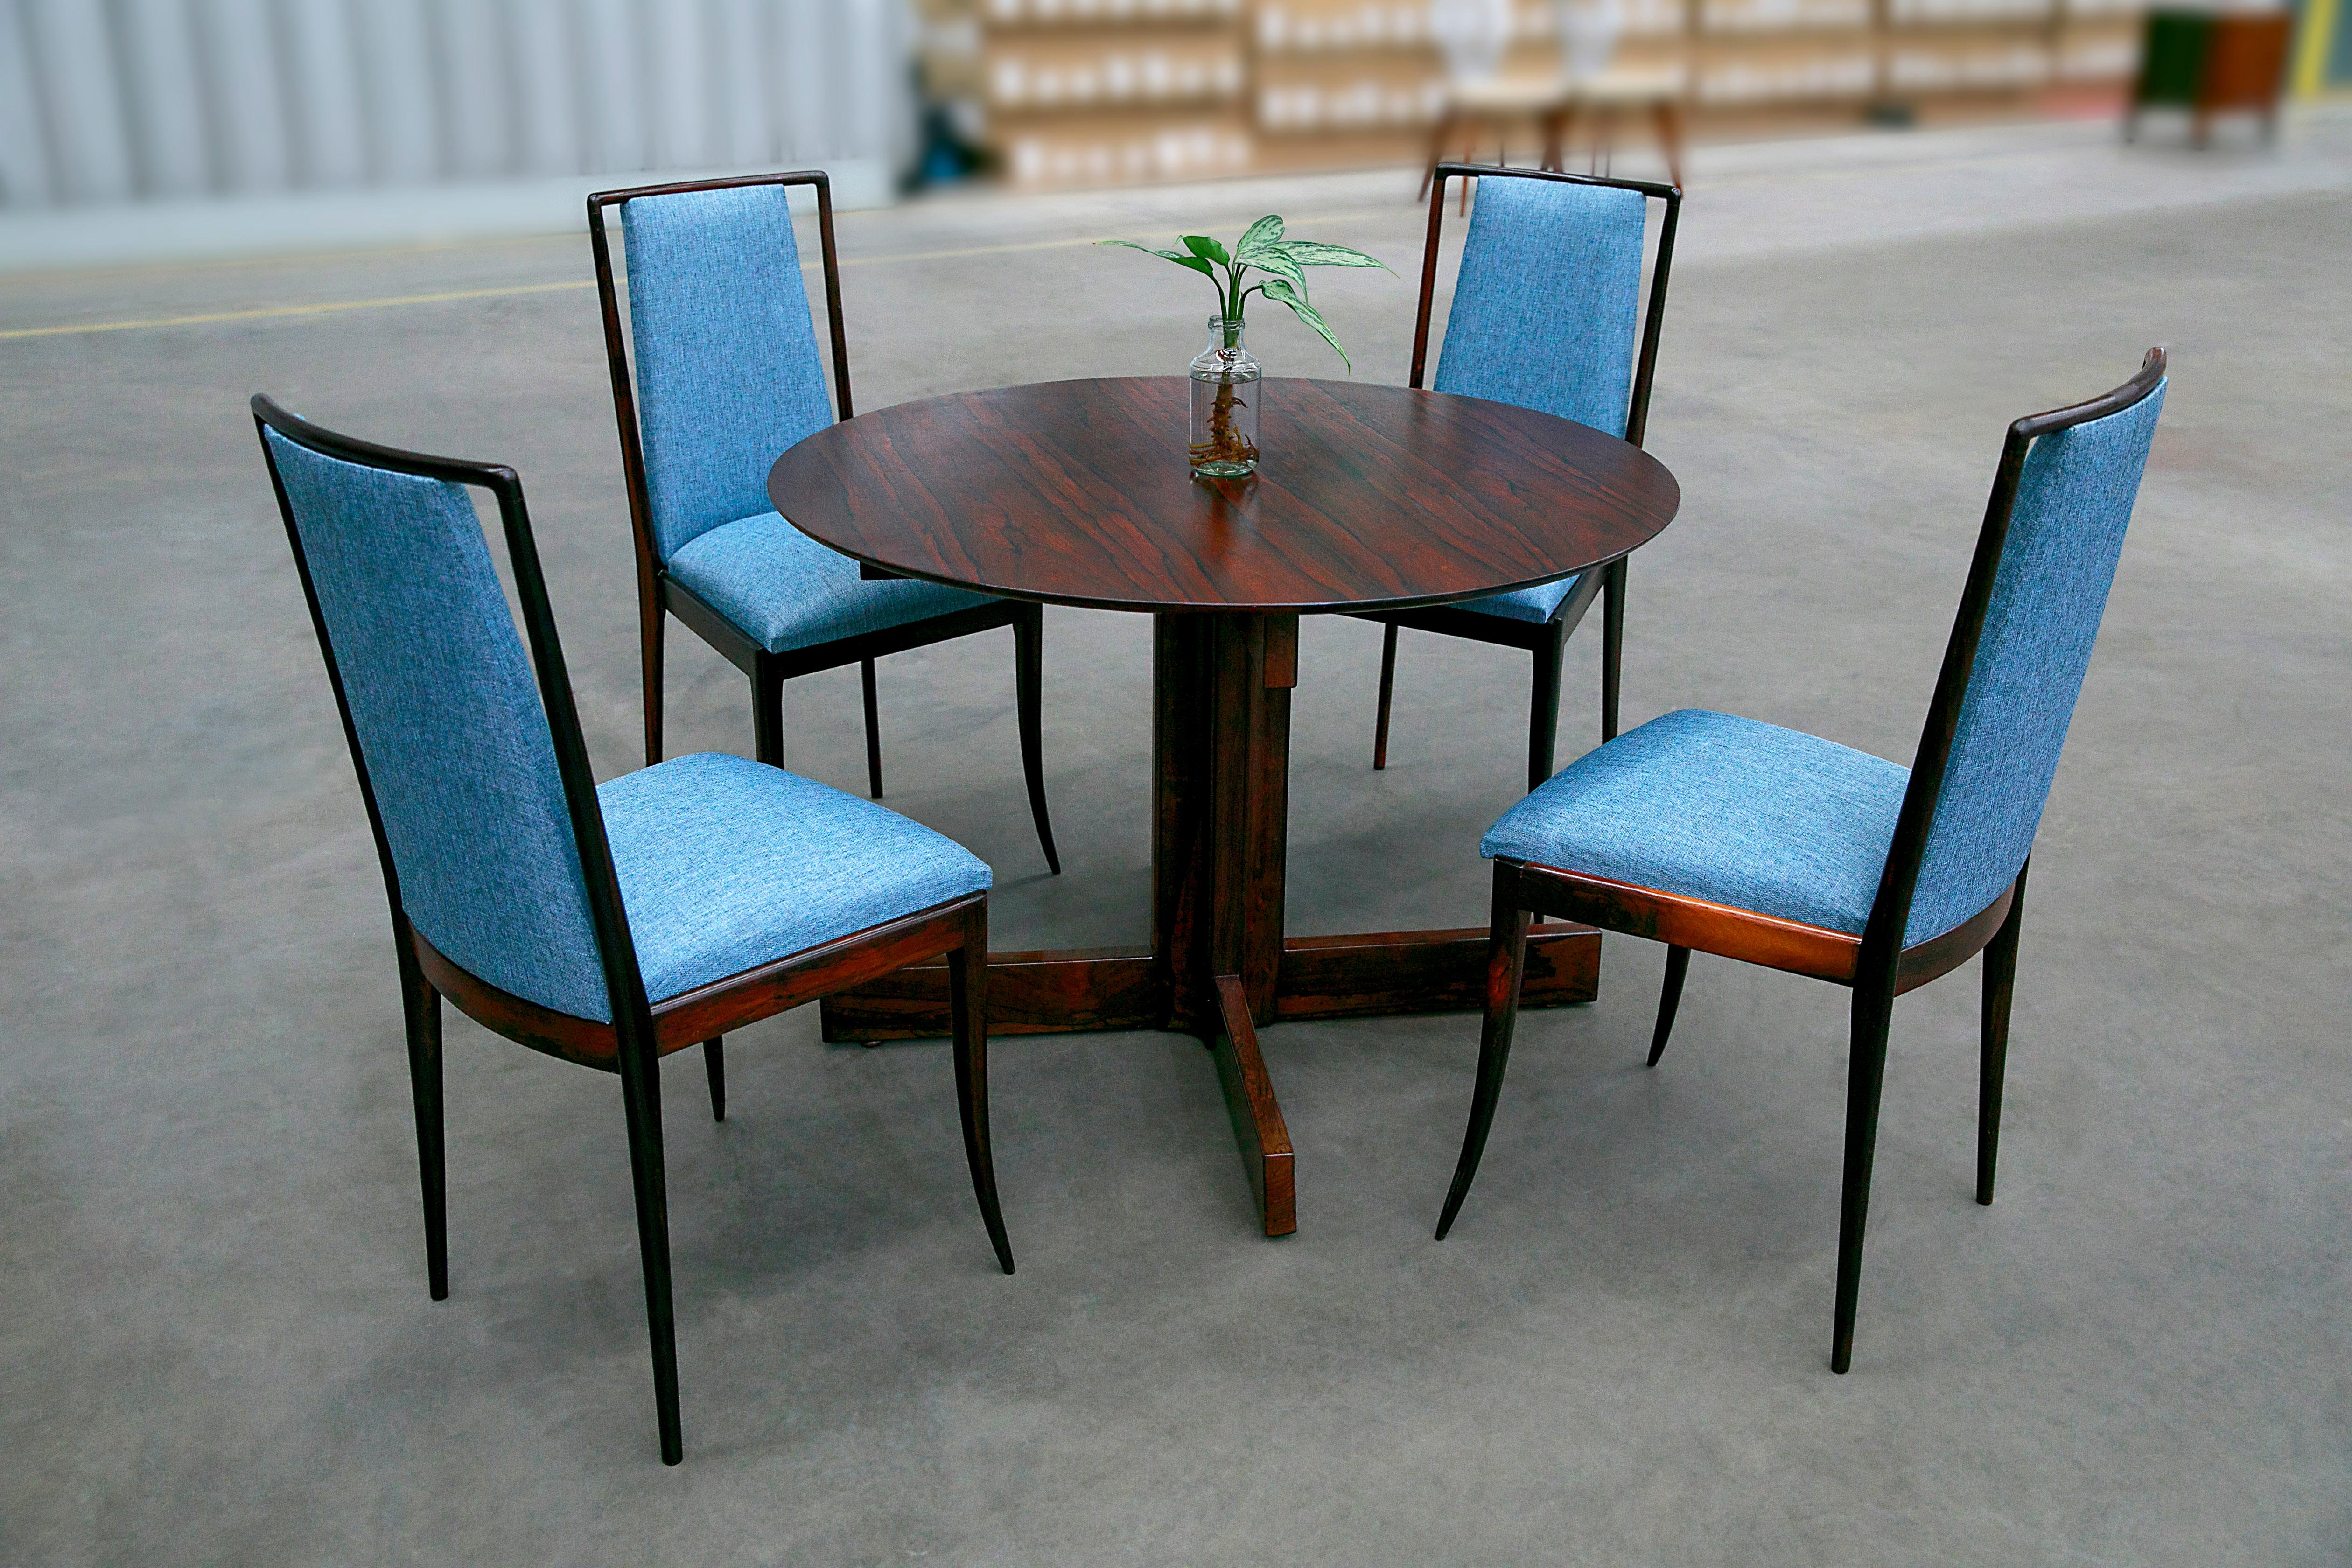 Brazilian Modern 4 Chair Set in Hardwood & Blue Fabric by G. Scapinelli, Brazi For Sale 4